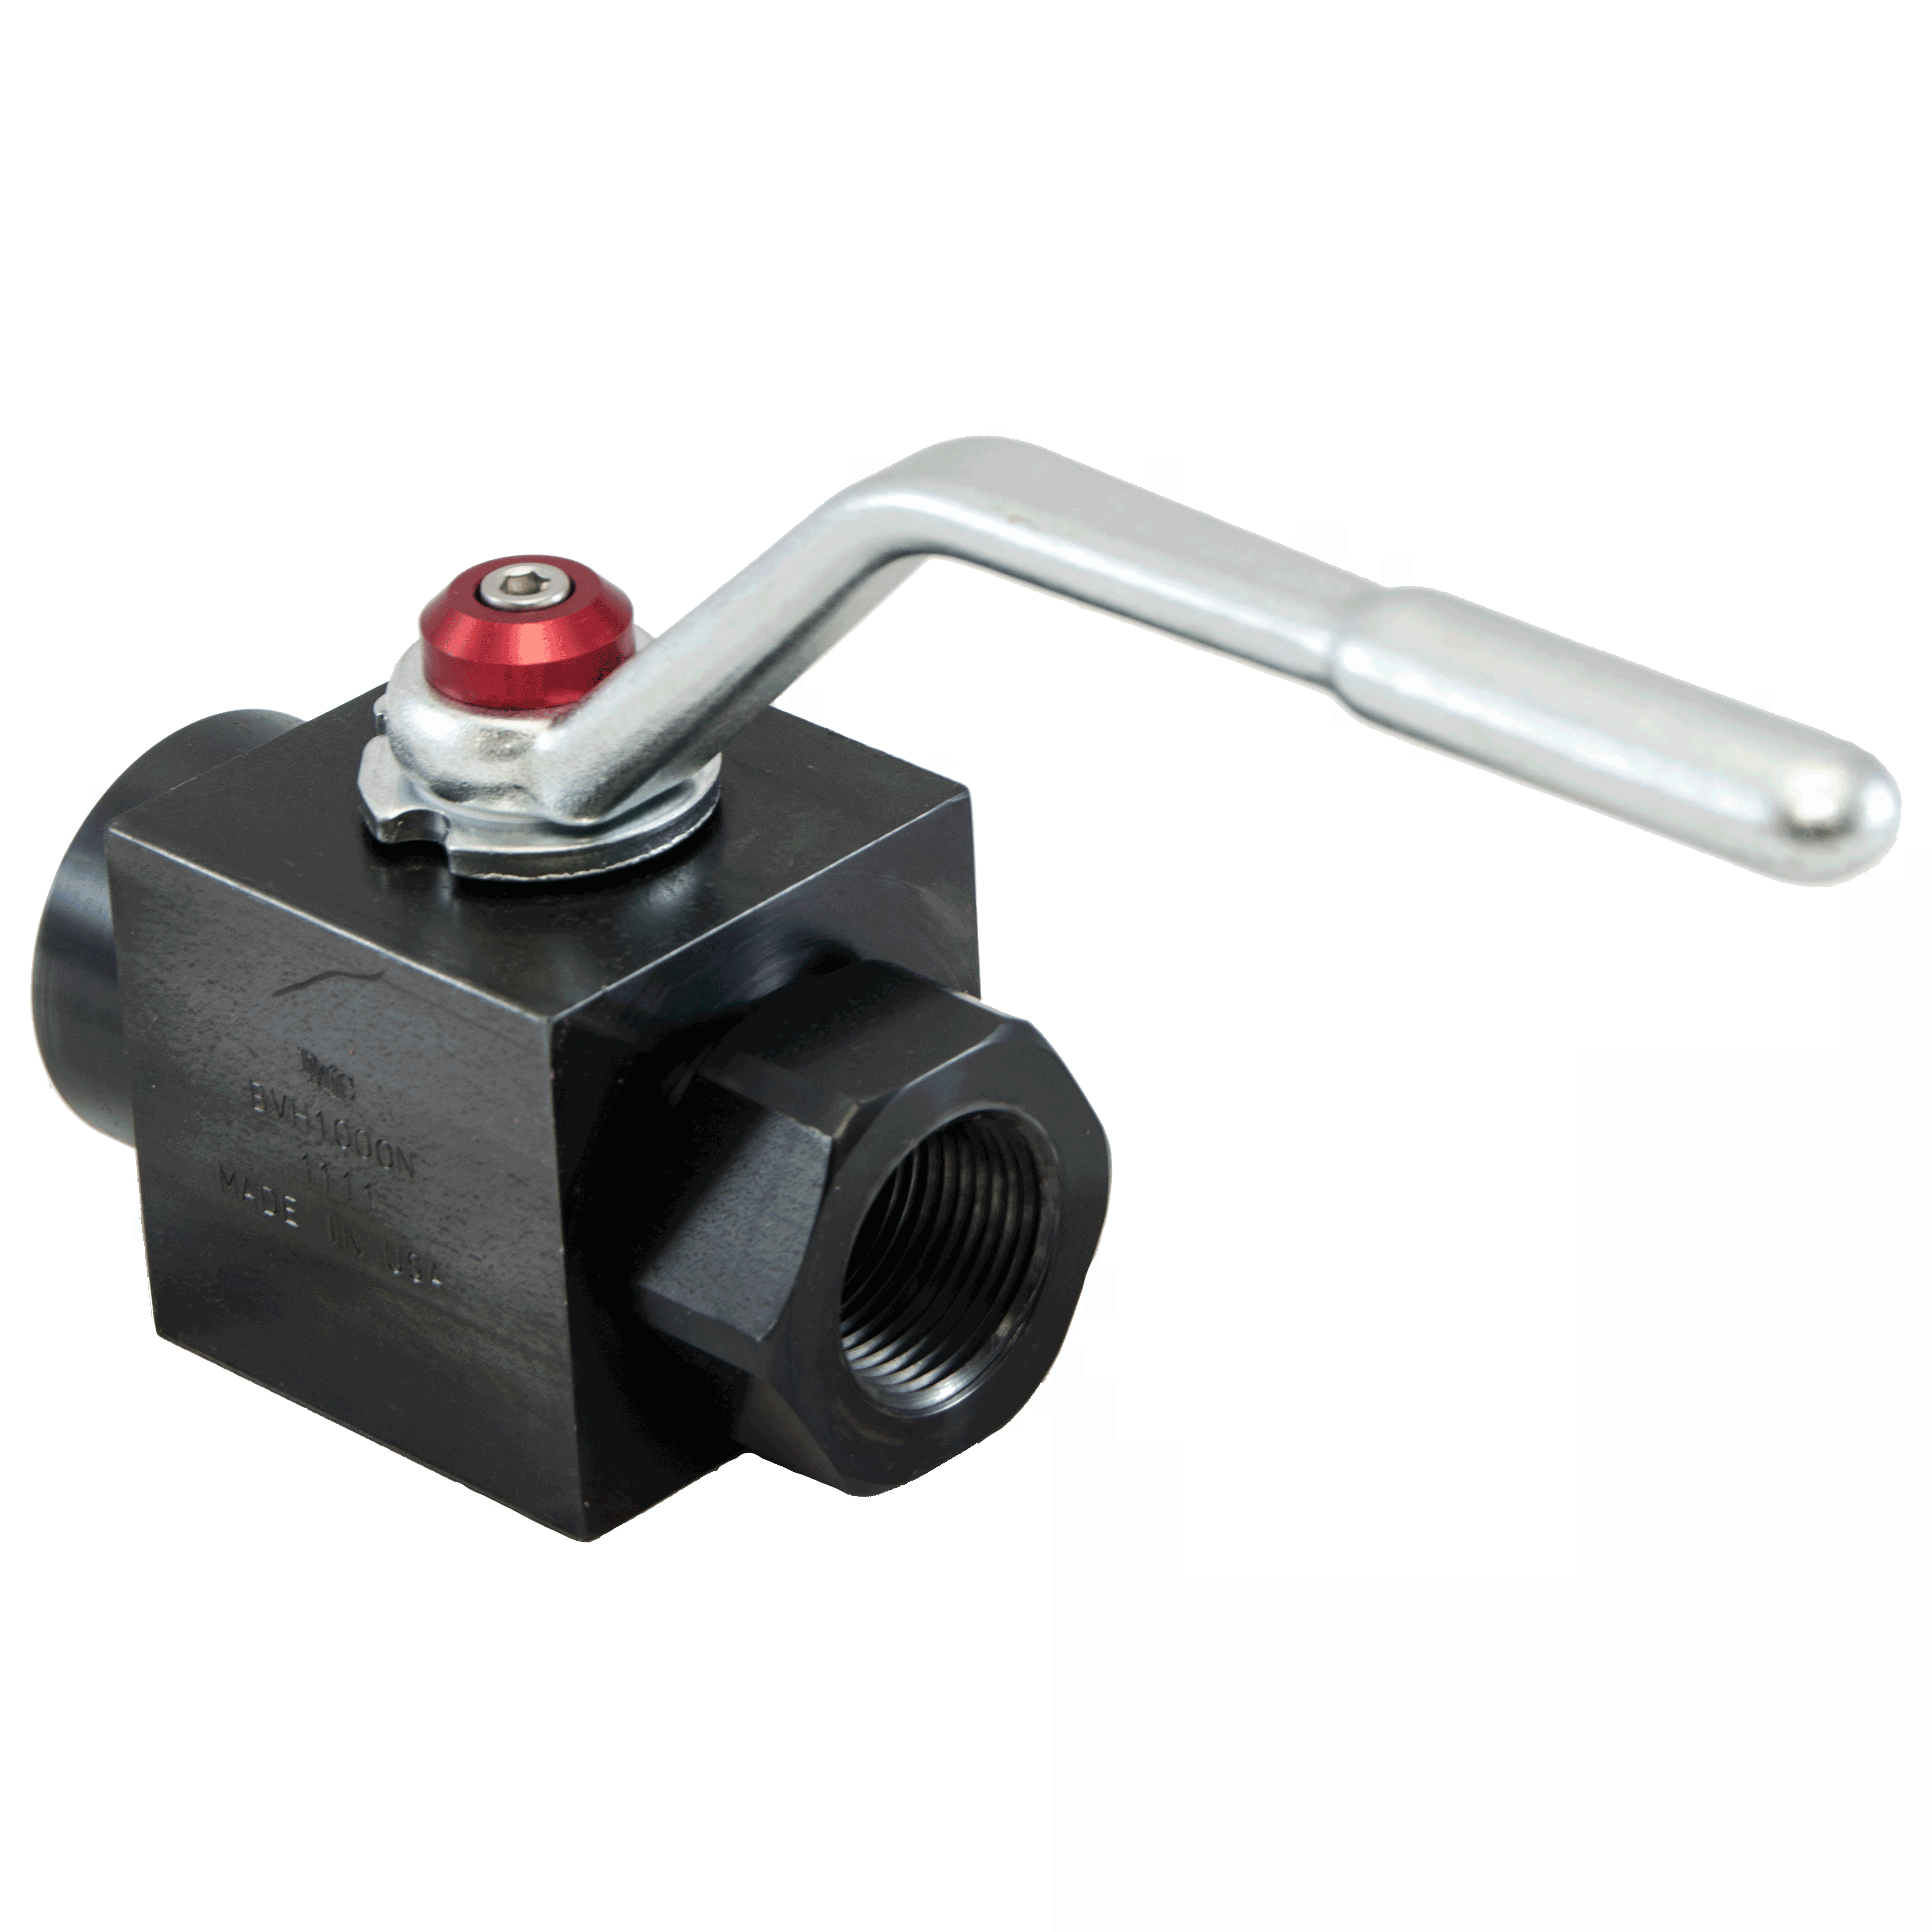 BVH-0500N-1111 : DMIC Square Body Ball Valve, 1/2 NPT, Carbon Steel, 7500psi, Two-Way